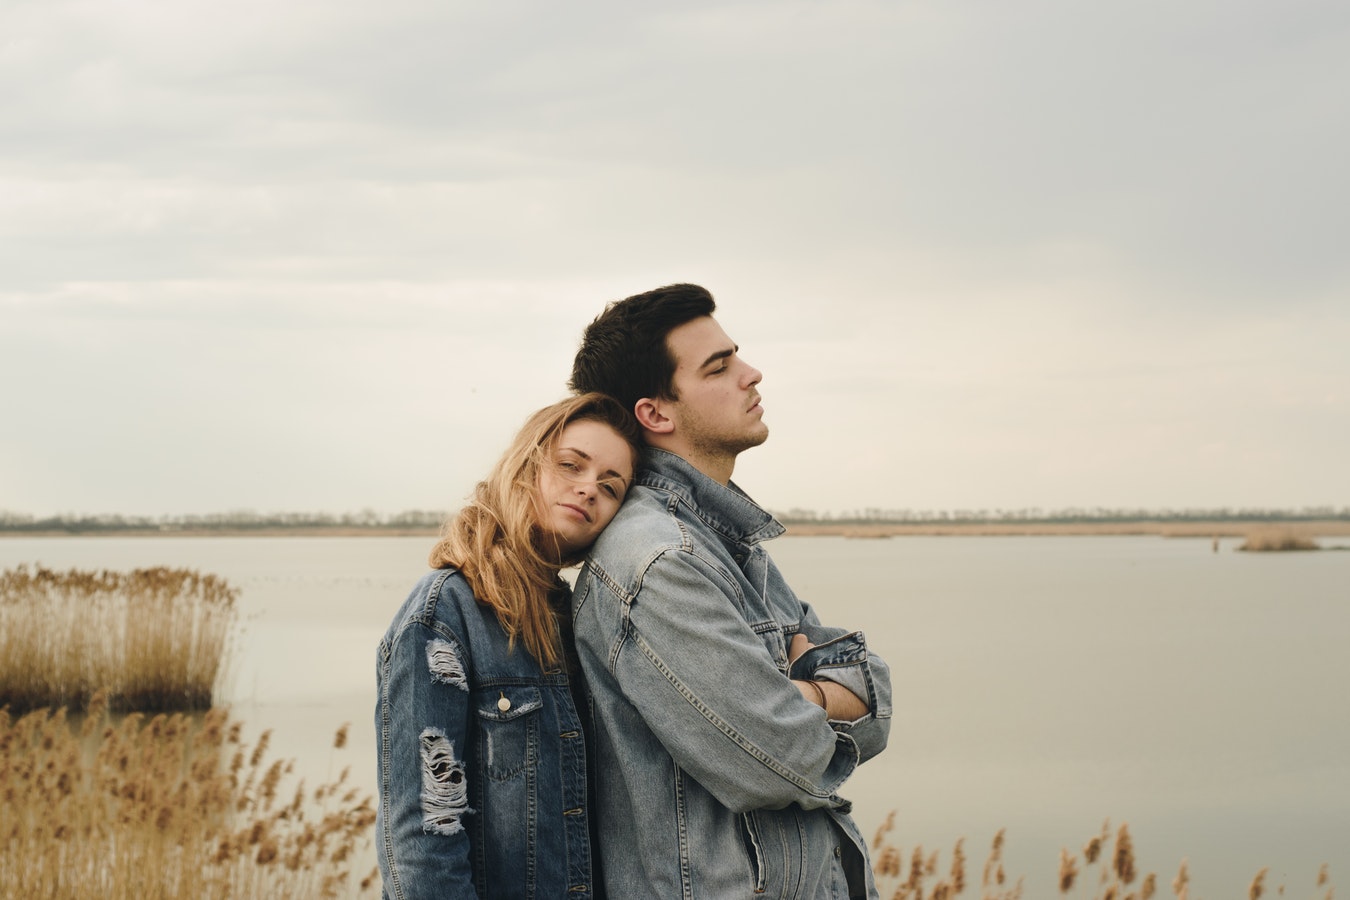 Early Red Flags in Relationships to Be on the Lookout For